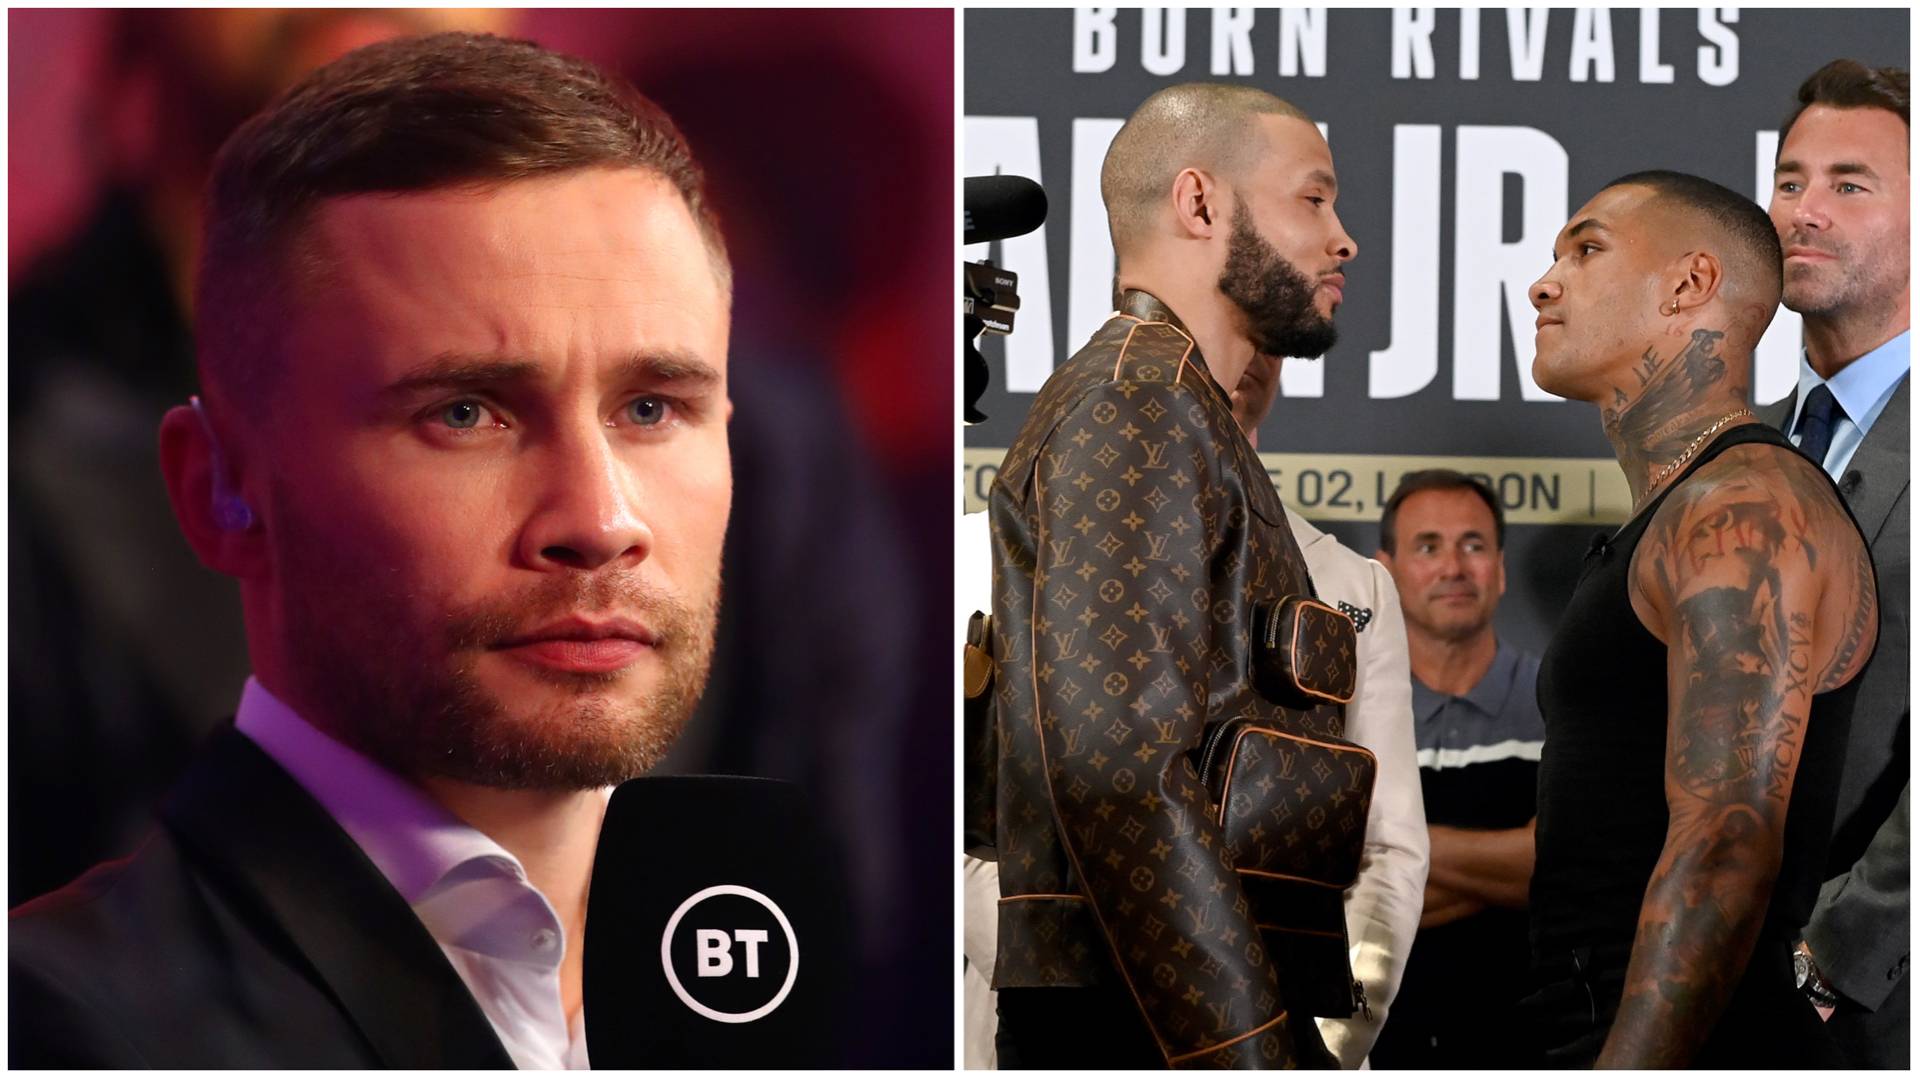 Carl Frampton has spoken out after Conor Benn failed a drugs test ahead of his fight with Chris Eubank Jr